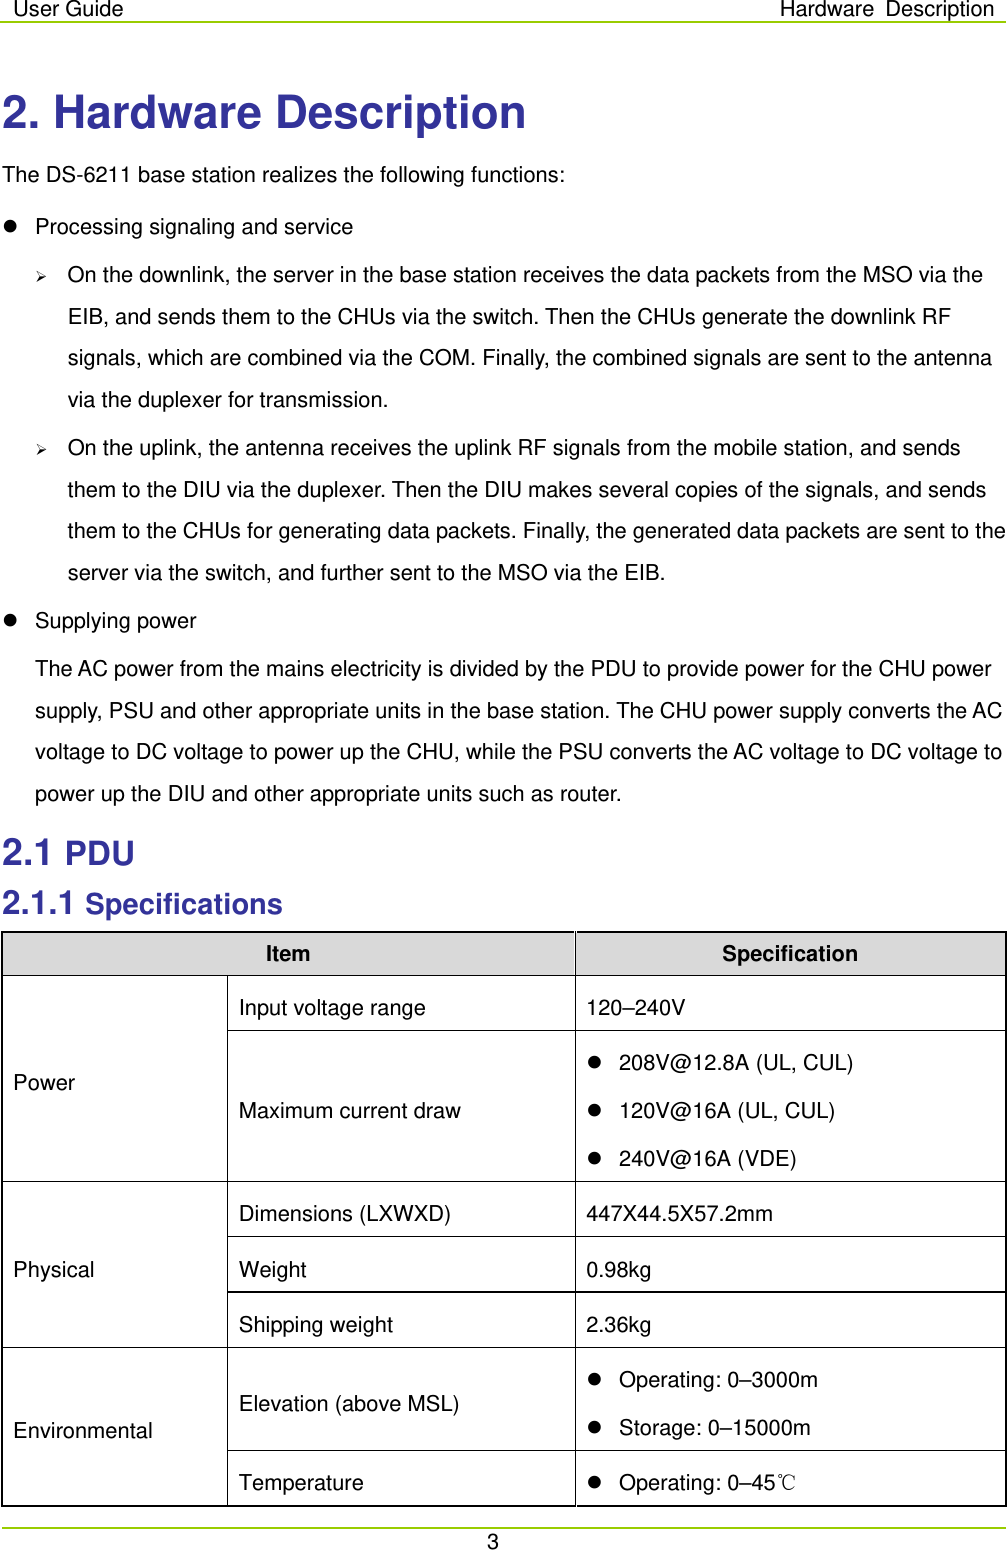 User Guide Hardware Description  3  2. Hardware Description The DS-6211 base station realizes the following functions:  Processing signaling and service  On the downlink, the server in the base station receives the data packets from the MSO via the EIB, and sends them to the CHUs via the switch. Then the CHUs generate the downlink RF signals, which are combined via the COM. Finally, the combined signals are sent to the antenna via the duplexer for transmission.  On the uplink, the antenna receives the uplink RF signals from the mobile station, and sends them to the DIU via the duplexer. Then the DIU makes several copies of the signals, and sends them to the CHUs for generating data packets. Finally, the generated data packets are sent to the server via the switch, and further sent to the MSO via the EIB.  Supplying power The AC power from the mains electricity is divided by the PDU to provide power for the CHU power supply, PSU and other appropriate units in the base station. The CHU power supply converts the AC voltage to DC voltage to power up the CHU, while the PSU converts the AC voltage to DC voltage to power up the DIU and other appropriate units such as router.   2.1 PDU 2.1.1 Specifications Item Specification Power Input voltage range 120–240V Maximum current draw  208V@12.8A (UL, CUL)  120V@16A (UL, CUL)   240V@16A (VDE) Physical Dimensions (LXWXD) 447X44.5X57.2mm Weight 0.98kg Shipping weight 2.36kg Environmental Elevation (above MSL)  Operating: 0–3000m  Storage: 0–15000m Temperature  Operating: 0–45℃ 